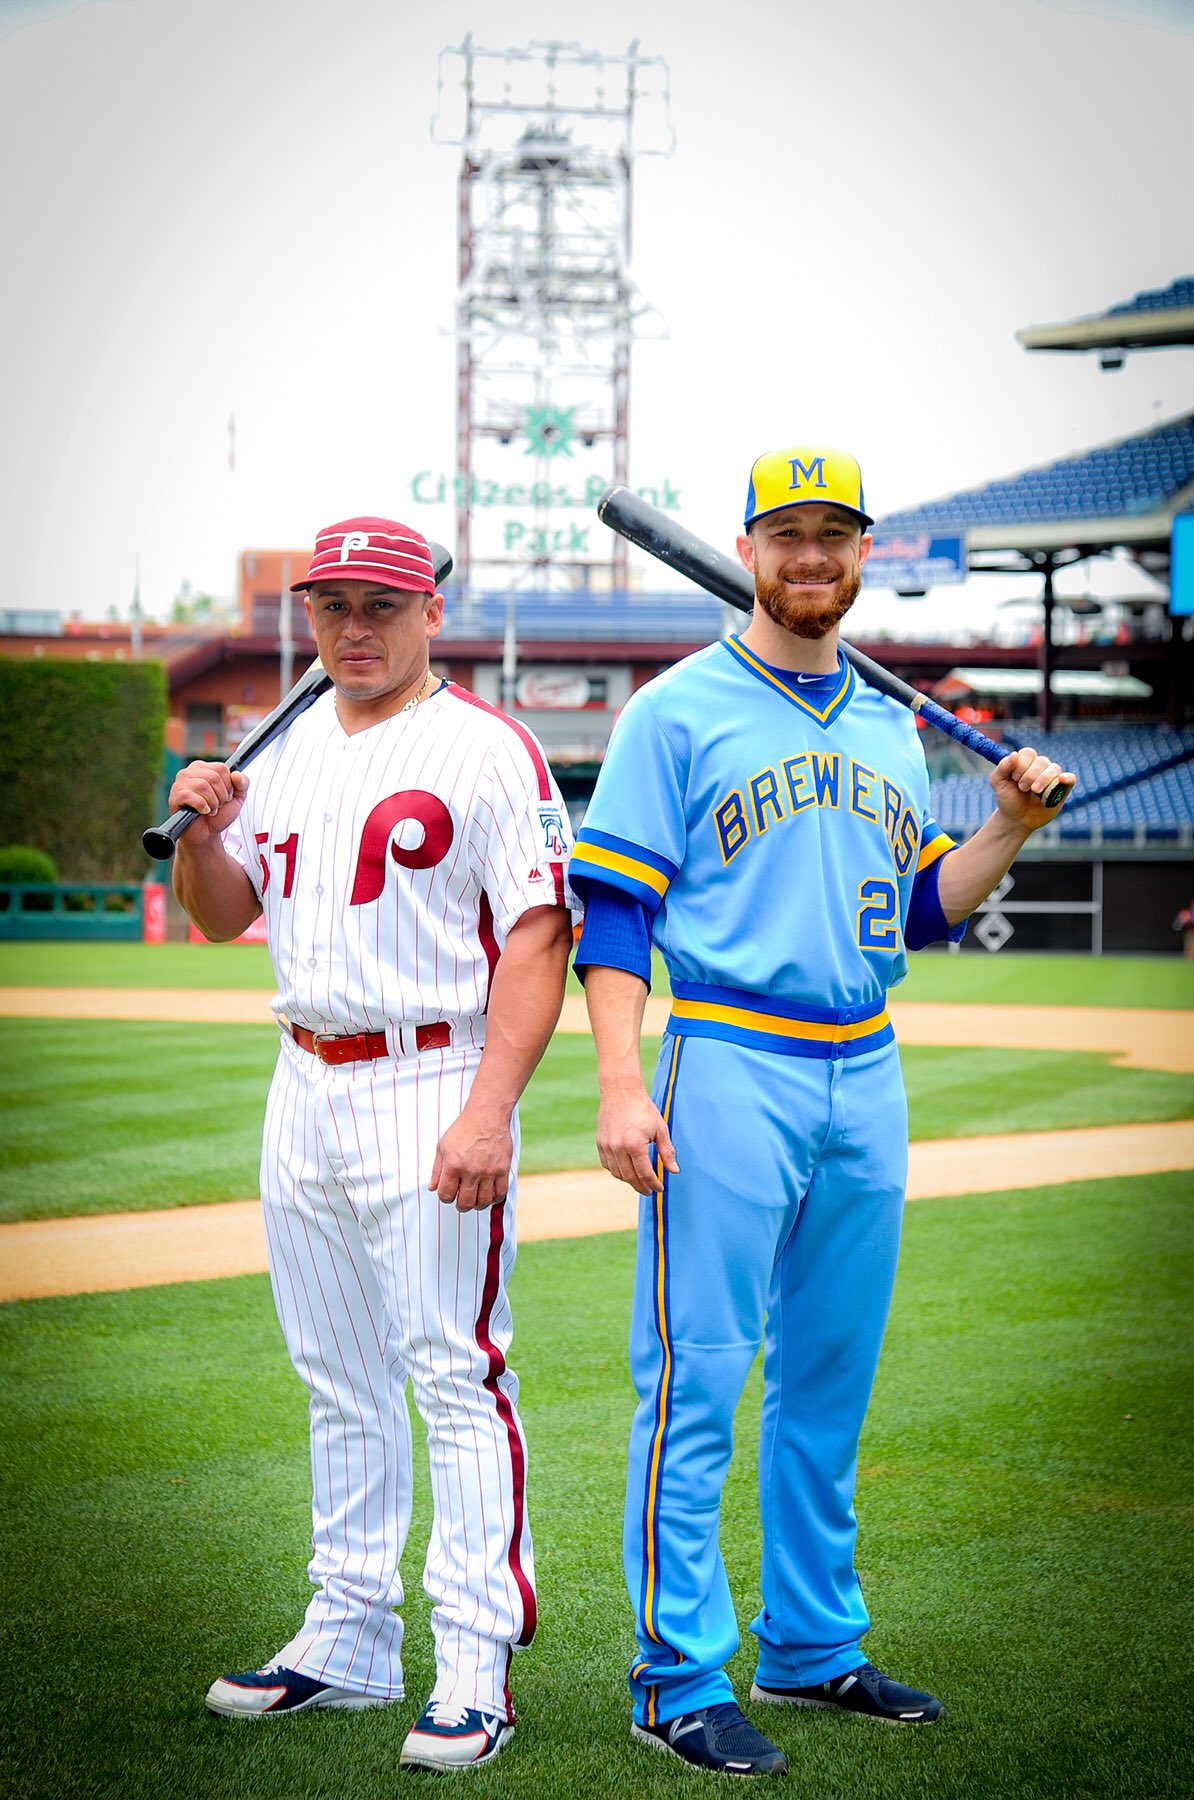 Capewood's Collections: Phillies-Brewers Retro Night